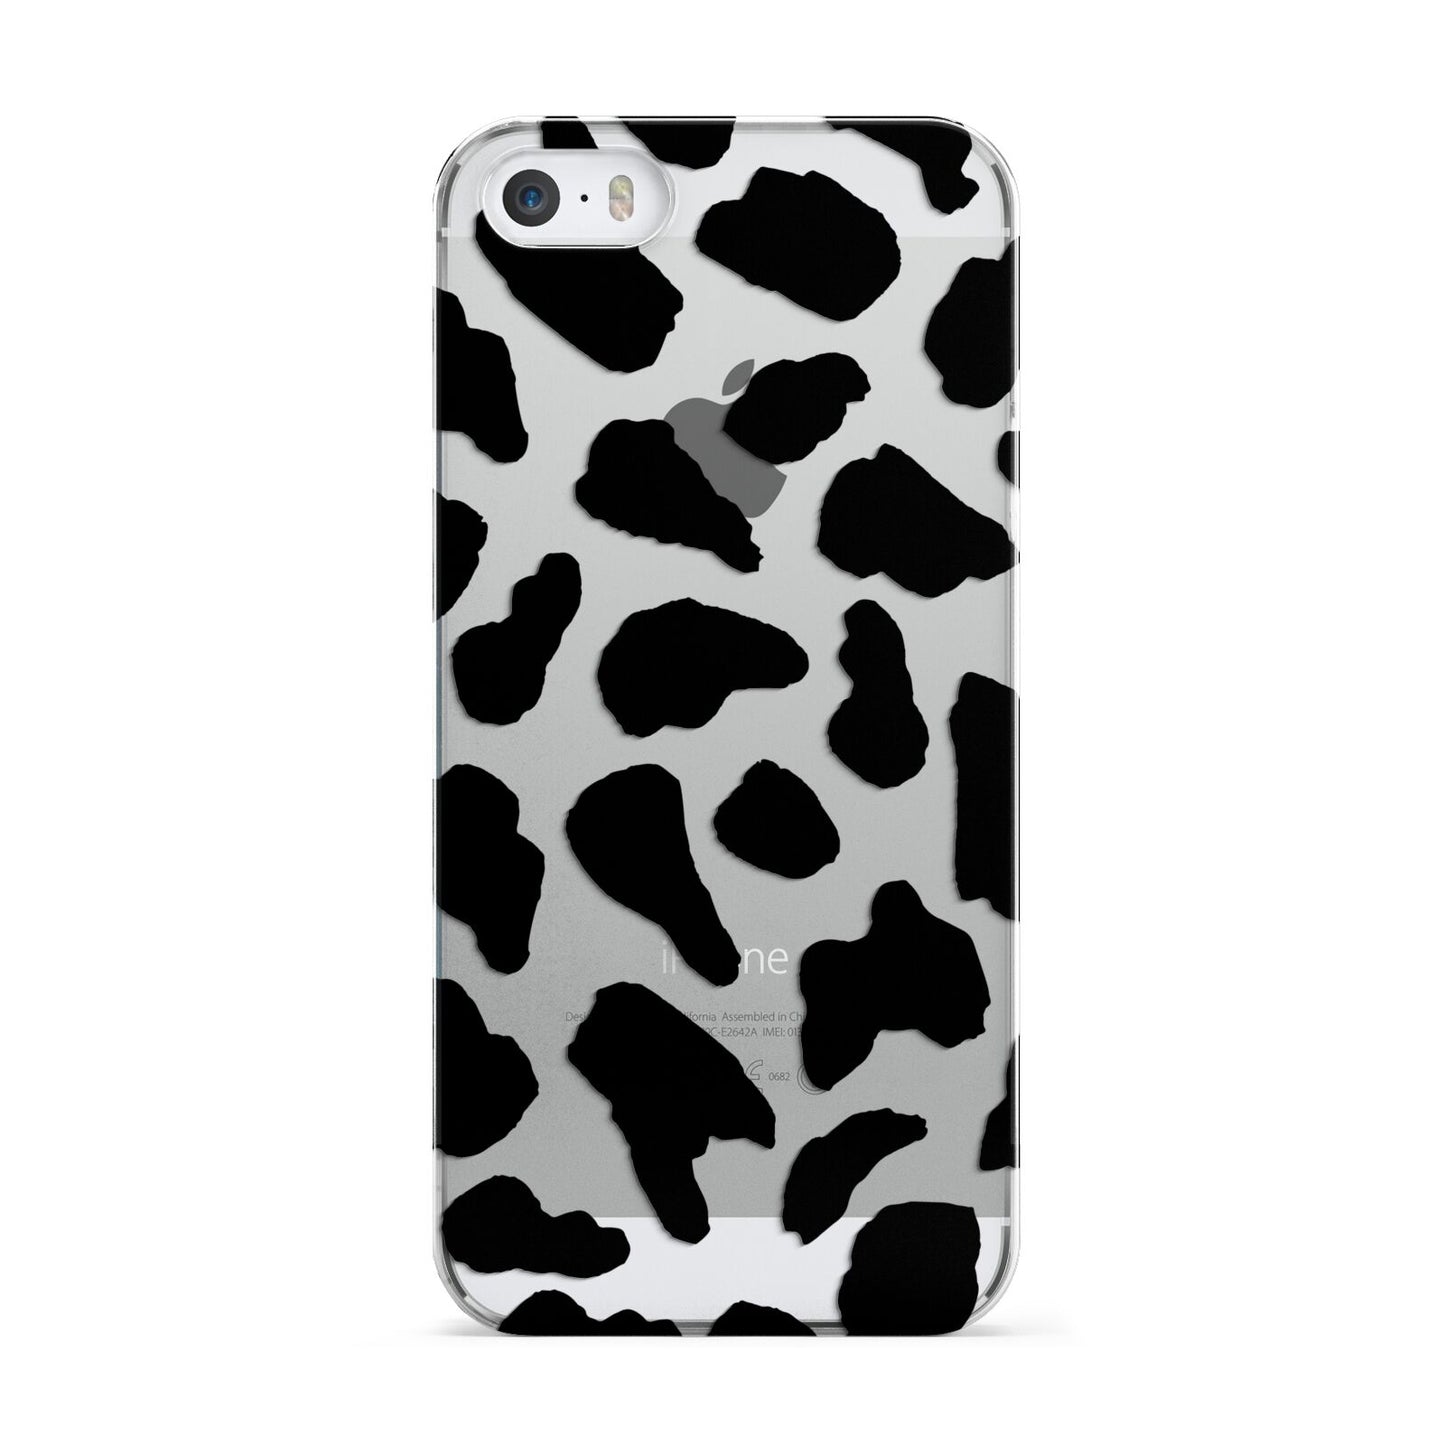 Black and White Cow Print Apple iPhone 5 Case